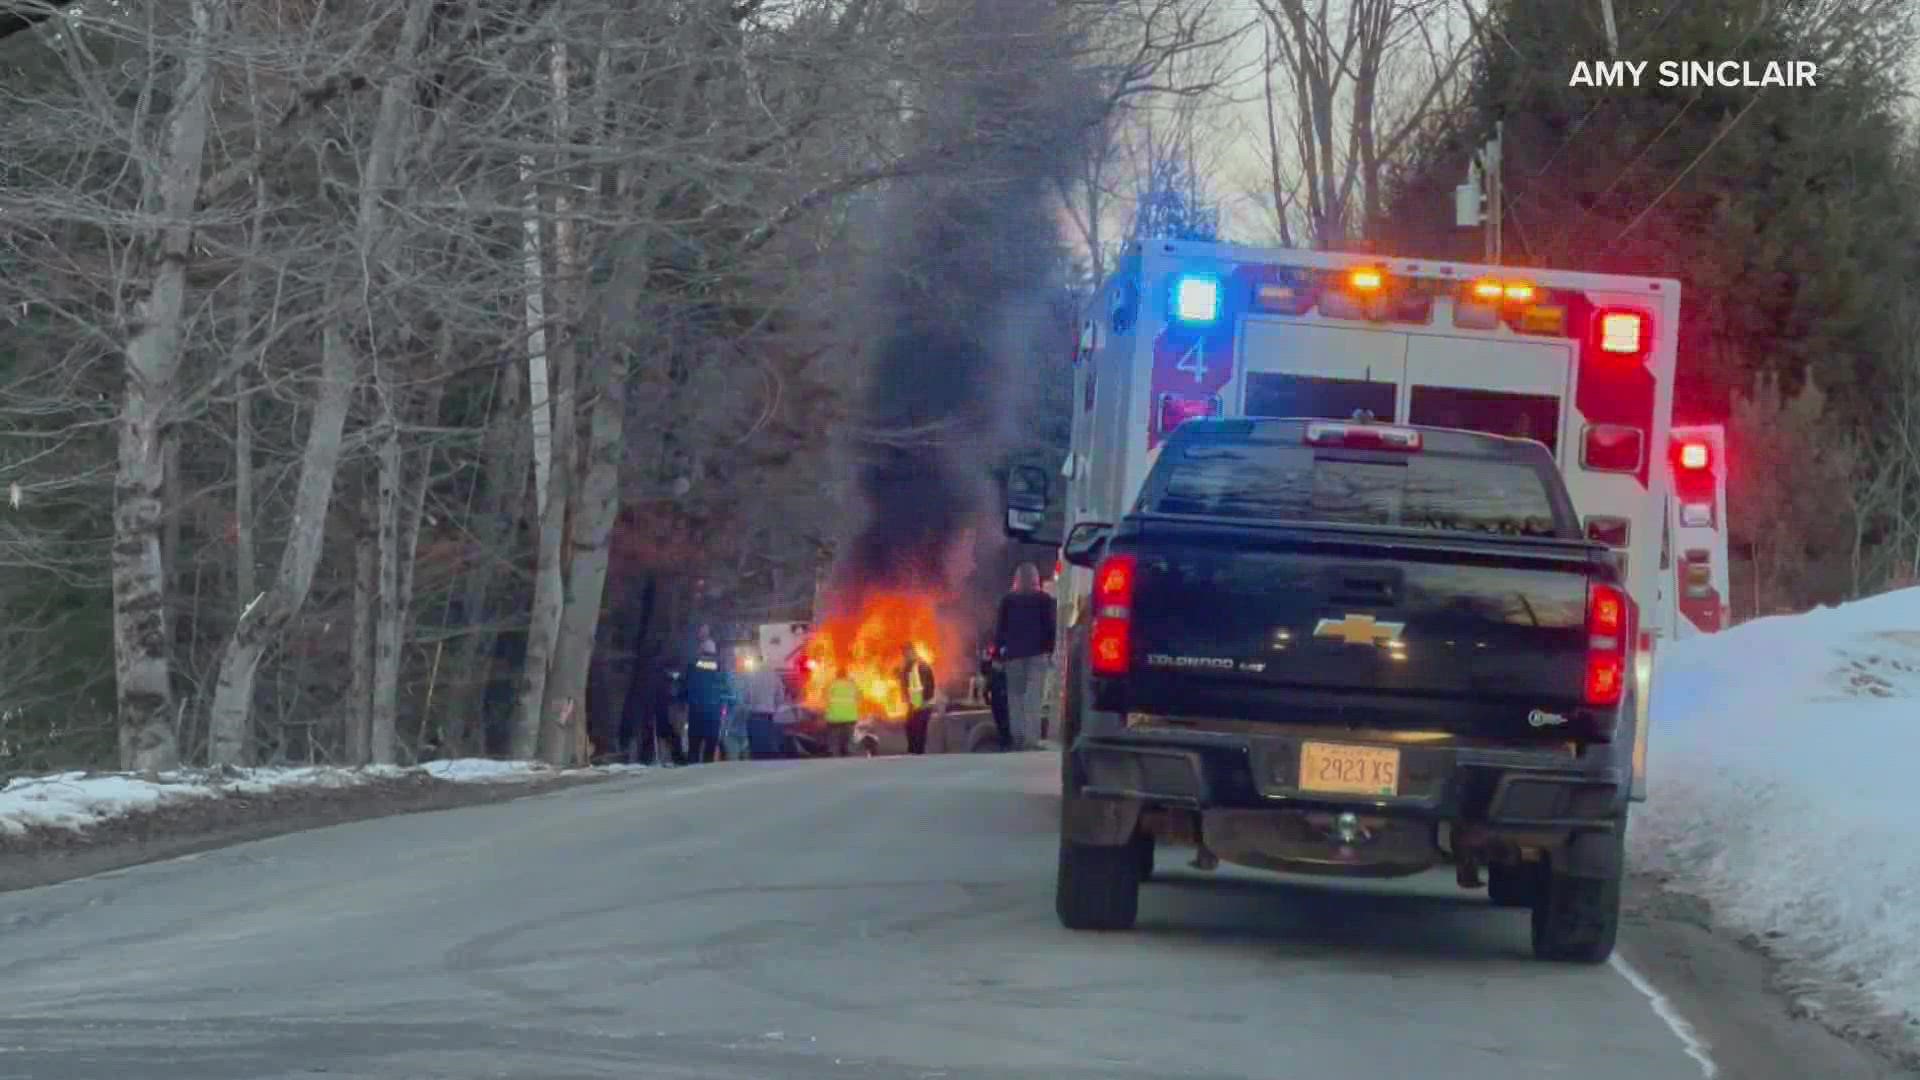 Maine State Police said the driver who hit a woman's vehicle with his pickup truck and fled the scene on Friday, March 4 was Ethan Rioux-Poulios, 26, of Woodstock.